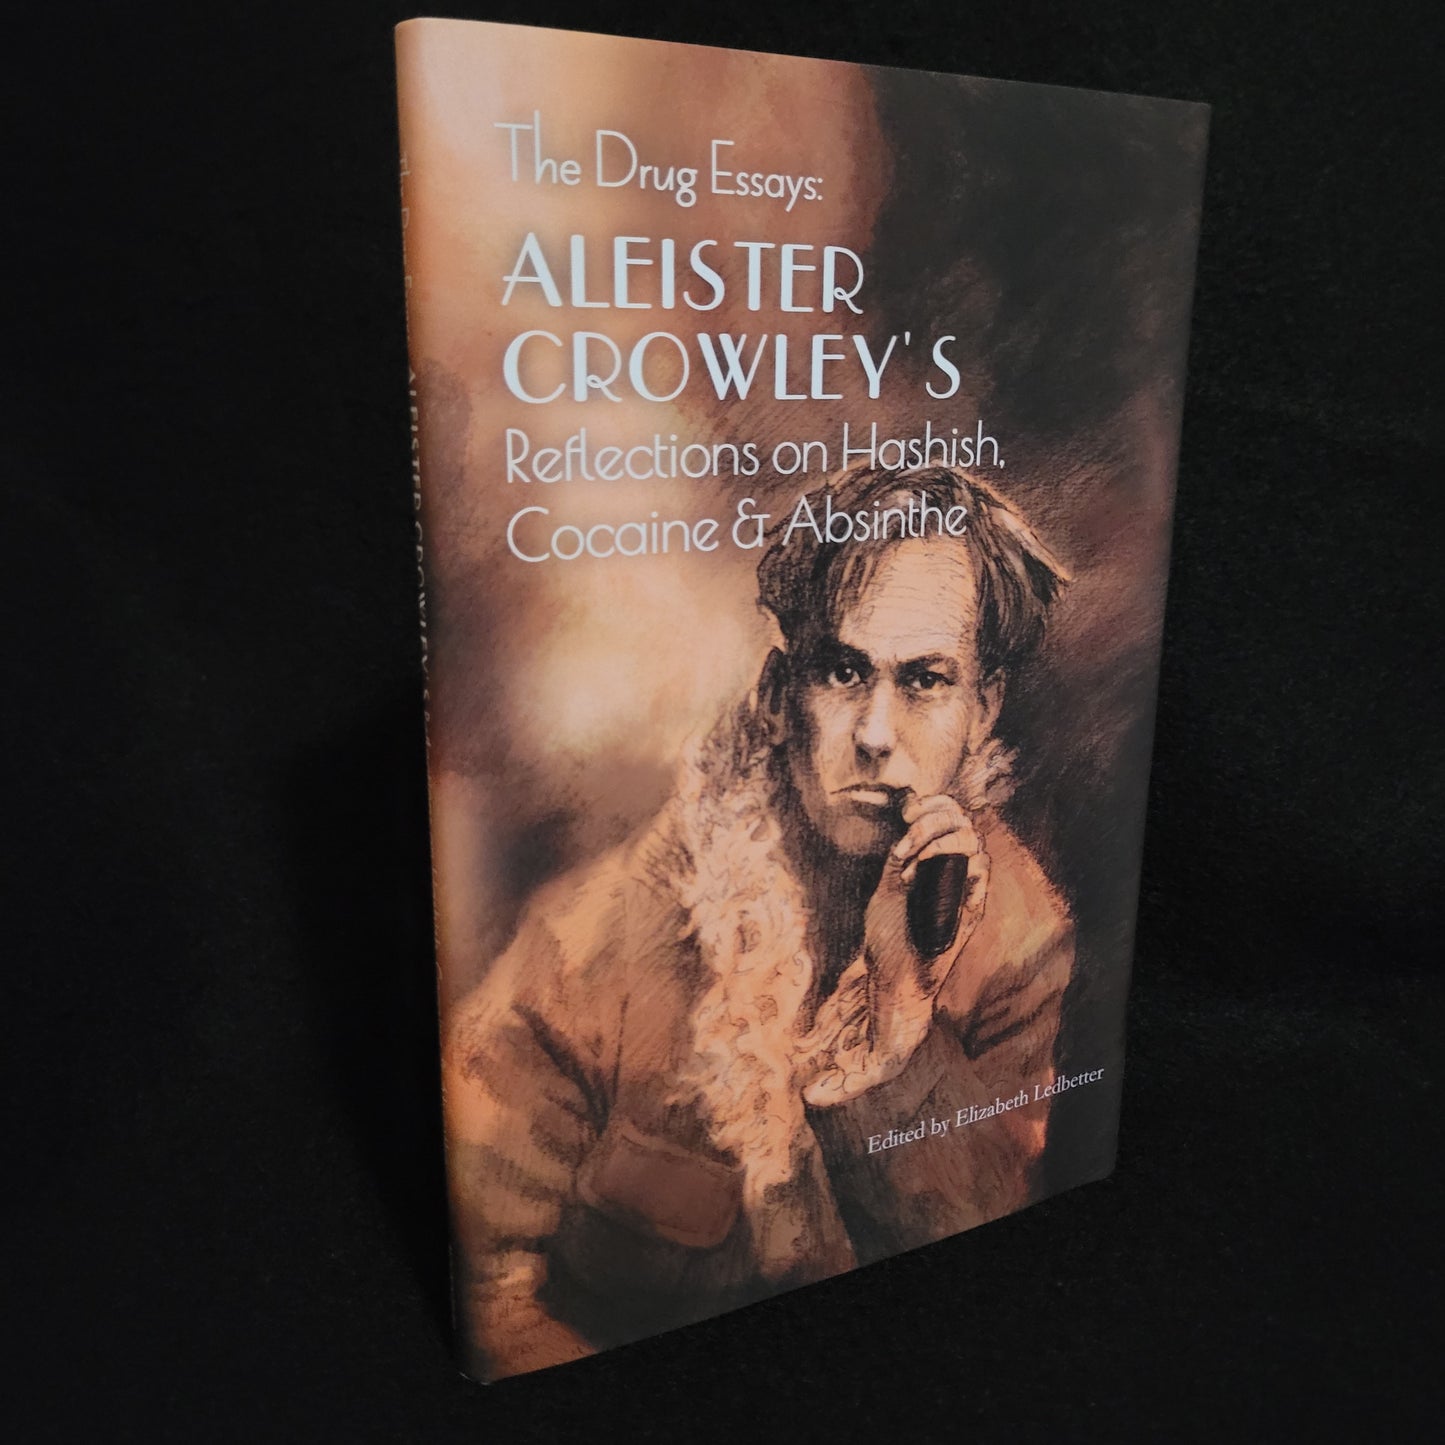 The Drug Essays: Aleister Crowley's Reflections on Hashish, Cocaine & Absinthe by Aleister Crowley (Mockingbird Press, 2019) Hardcover Edition